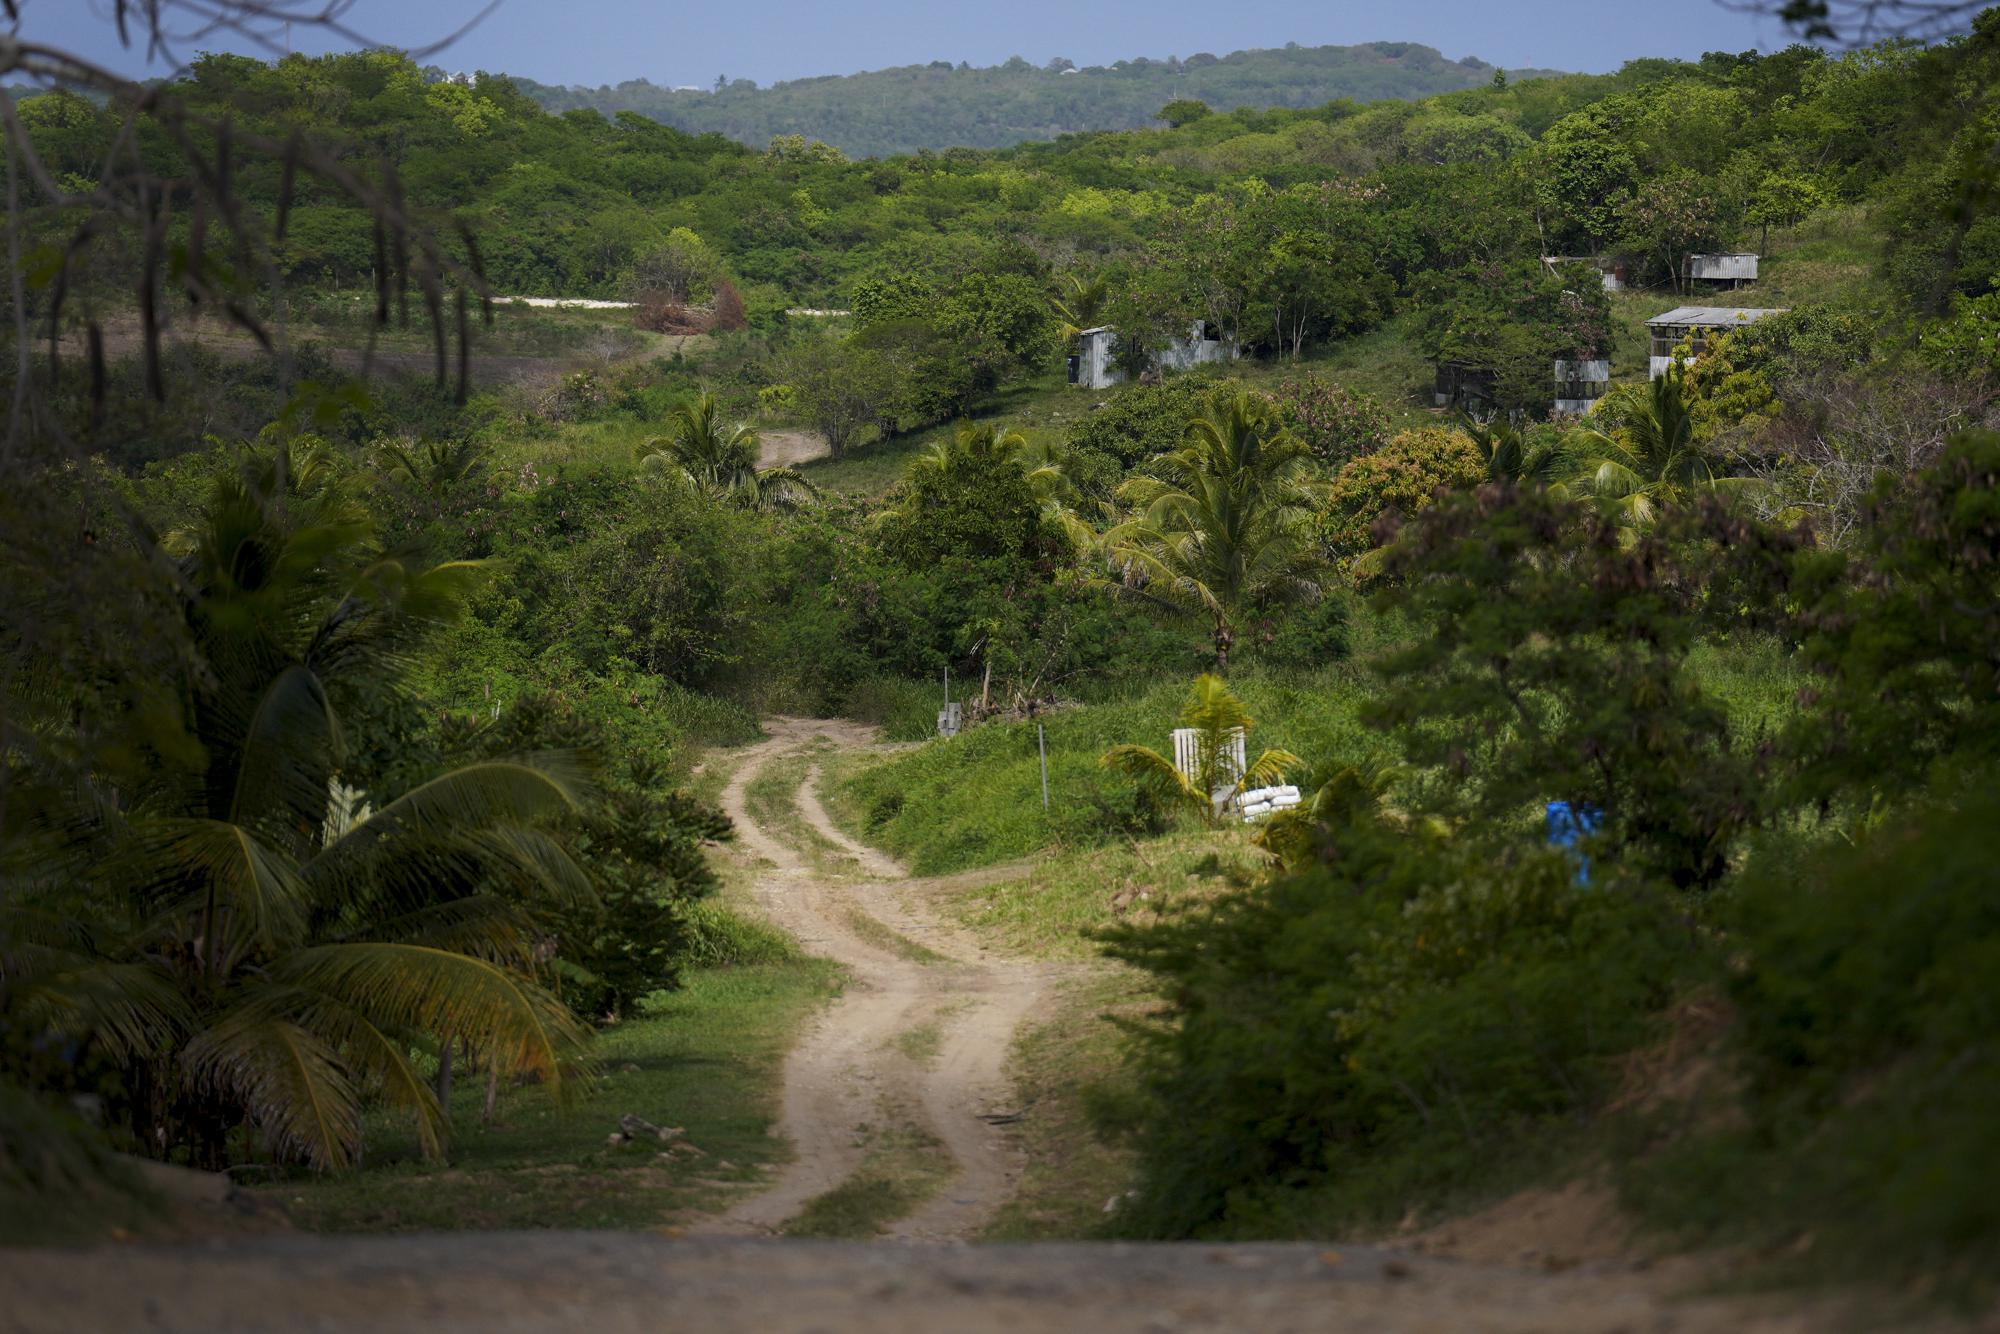 A dirt path leads down to the farm fields of the Ras Freeman Foundation for the Unification of Rastafari where the community grows fruit, vegetables, and cannabis, in Liberta, Antigua, on Sunday, May 14, 2023. Rastafari eat Ital, a plant-based diet developed by the spiritual movement. (AP Photo/Jessie Wardarski)